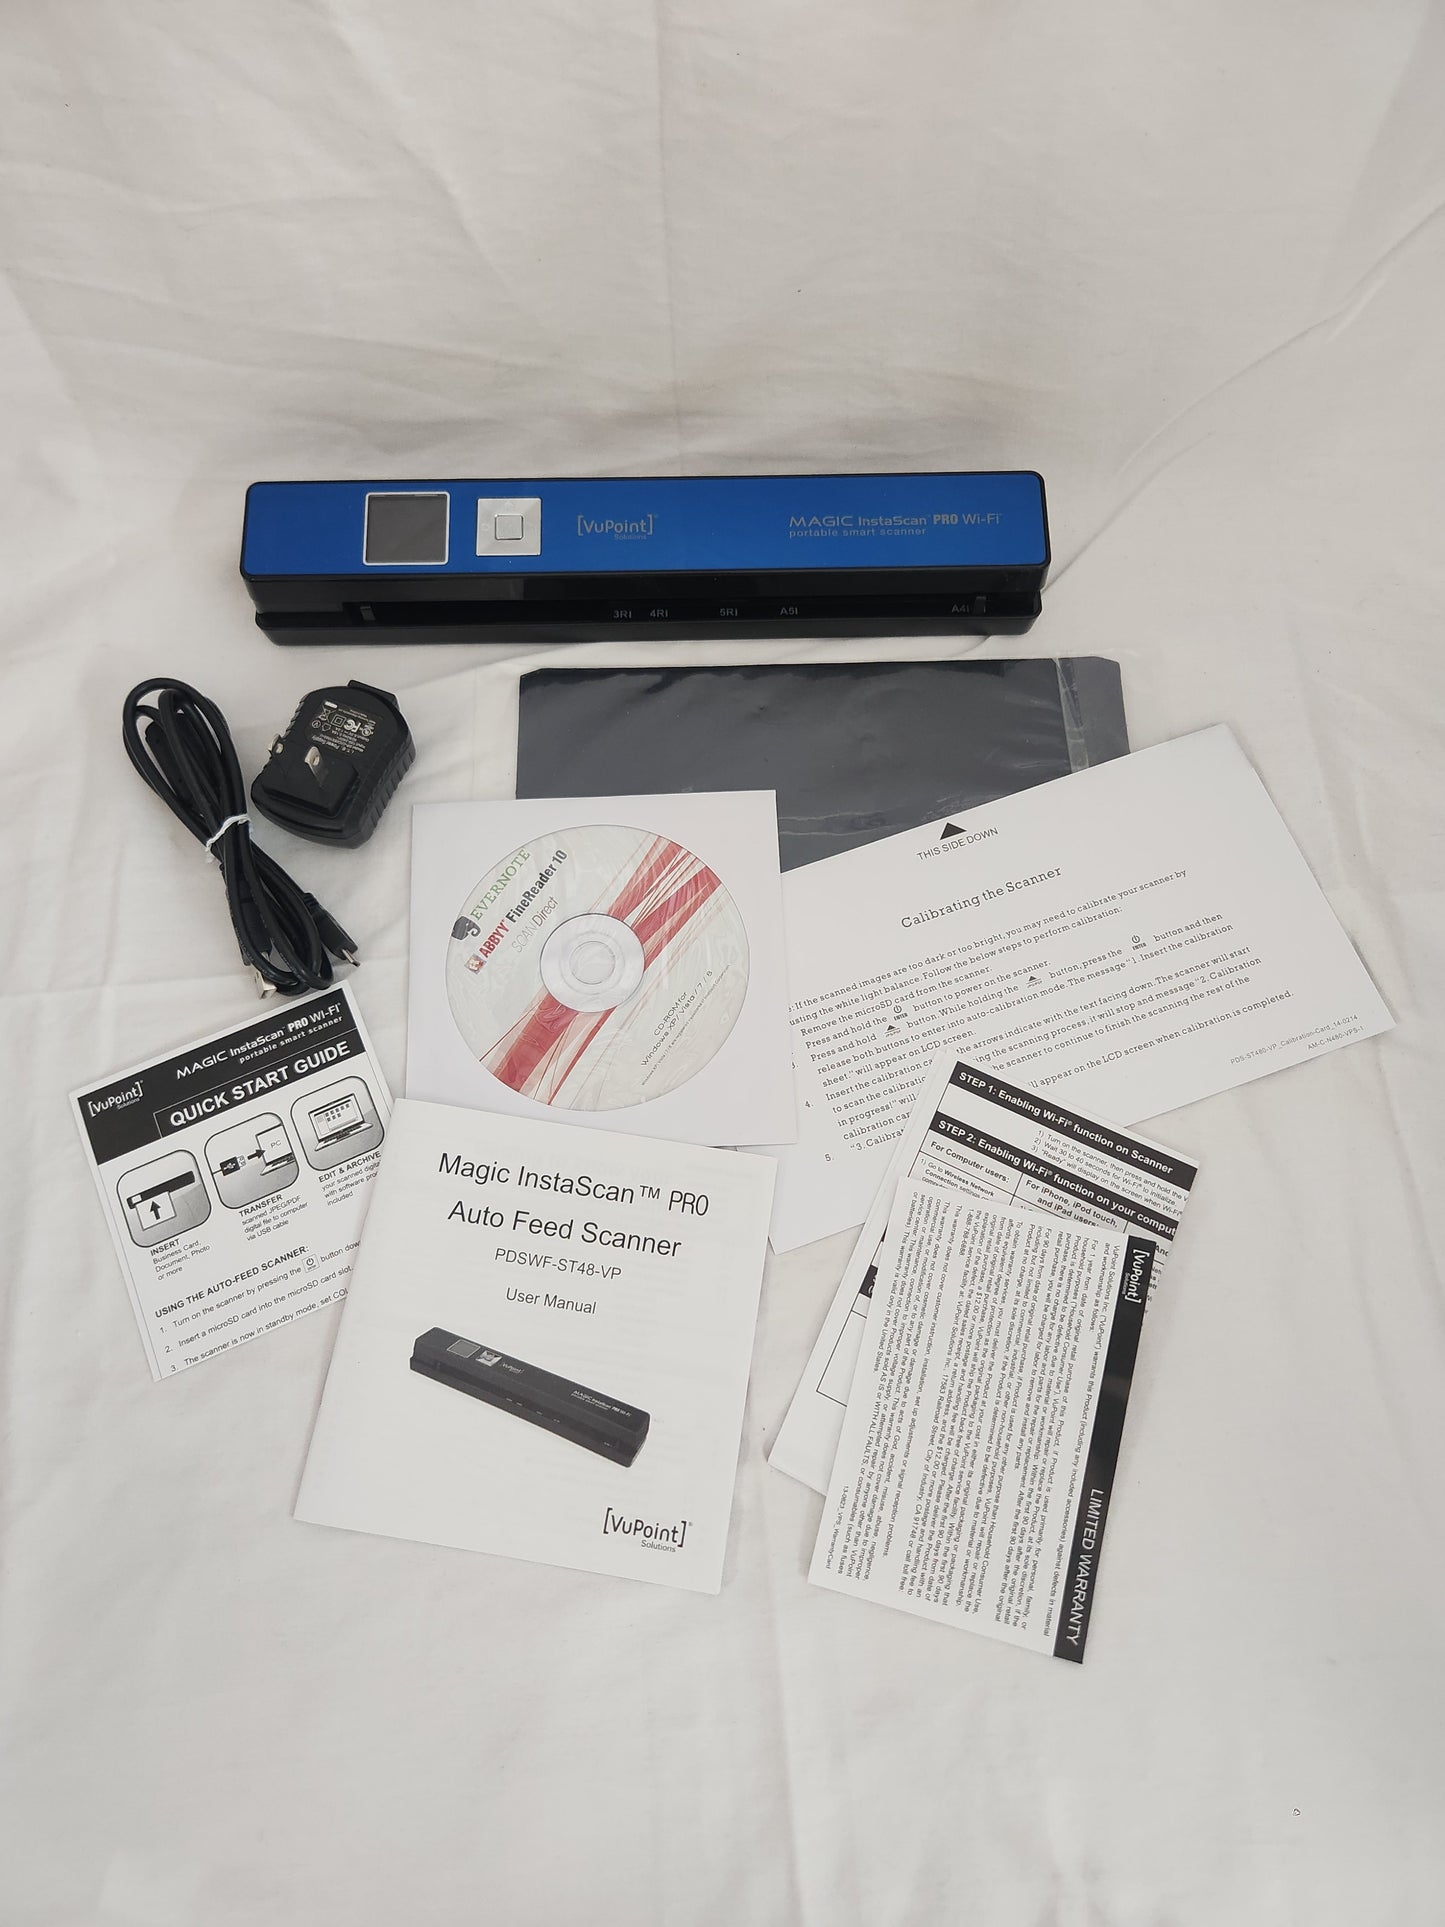 VuPoint Magic InstaScan Pro Portable Wi-Fi Smart Scanner